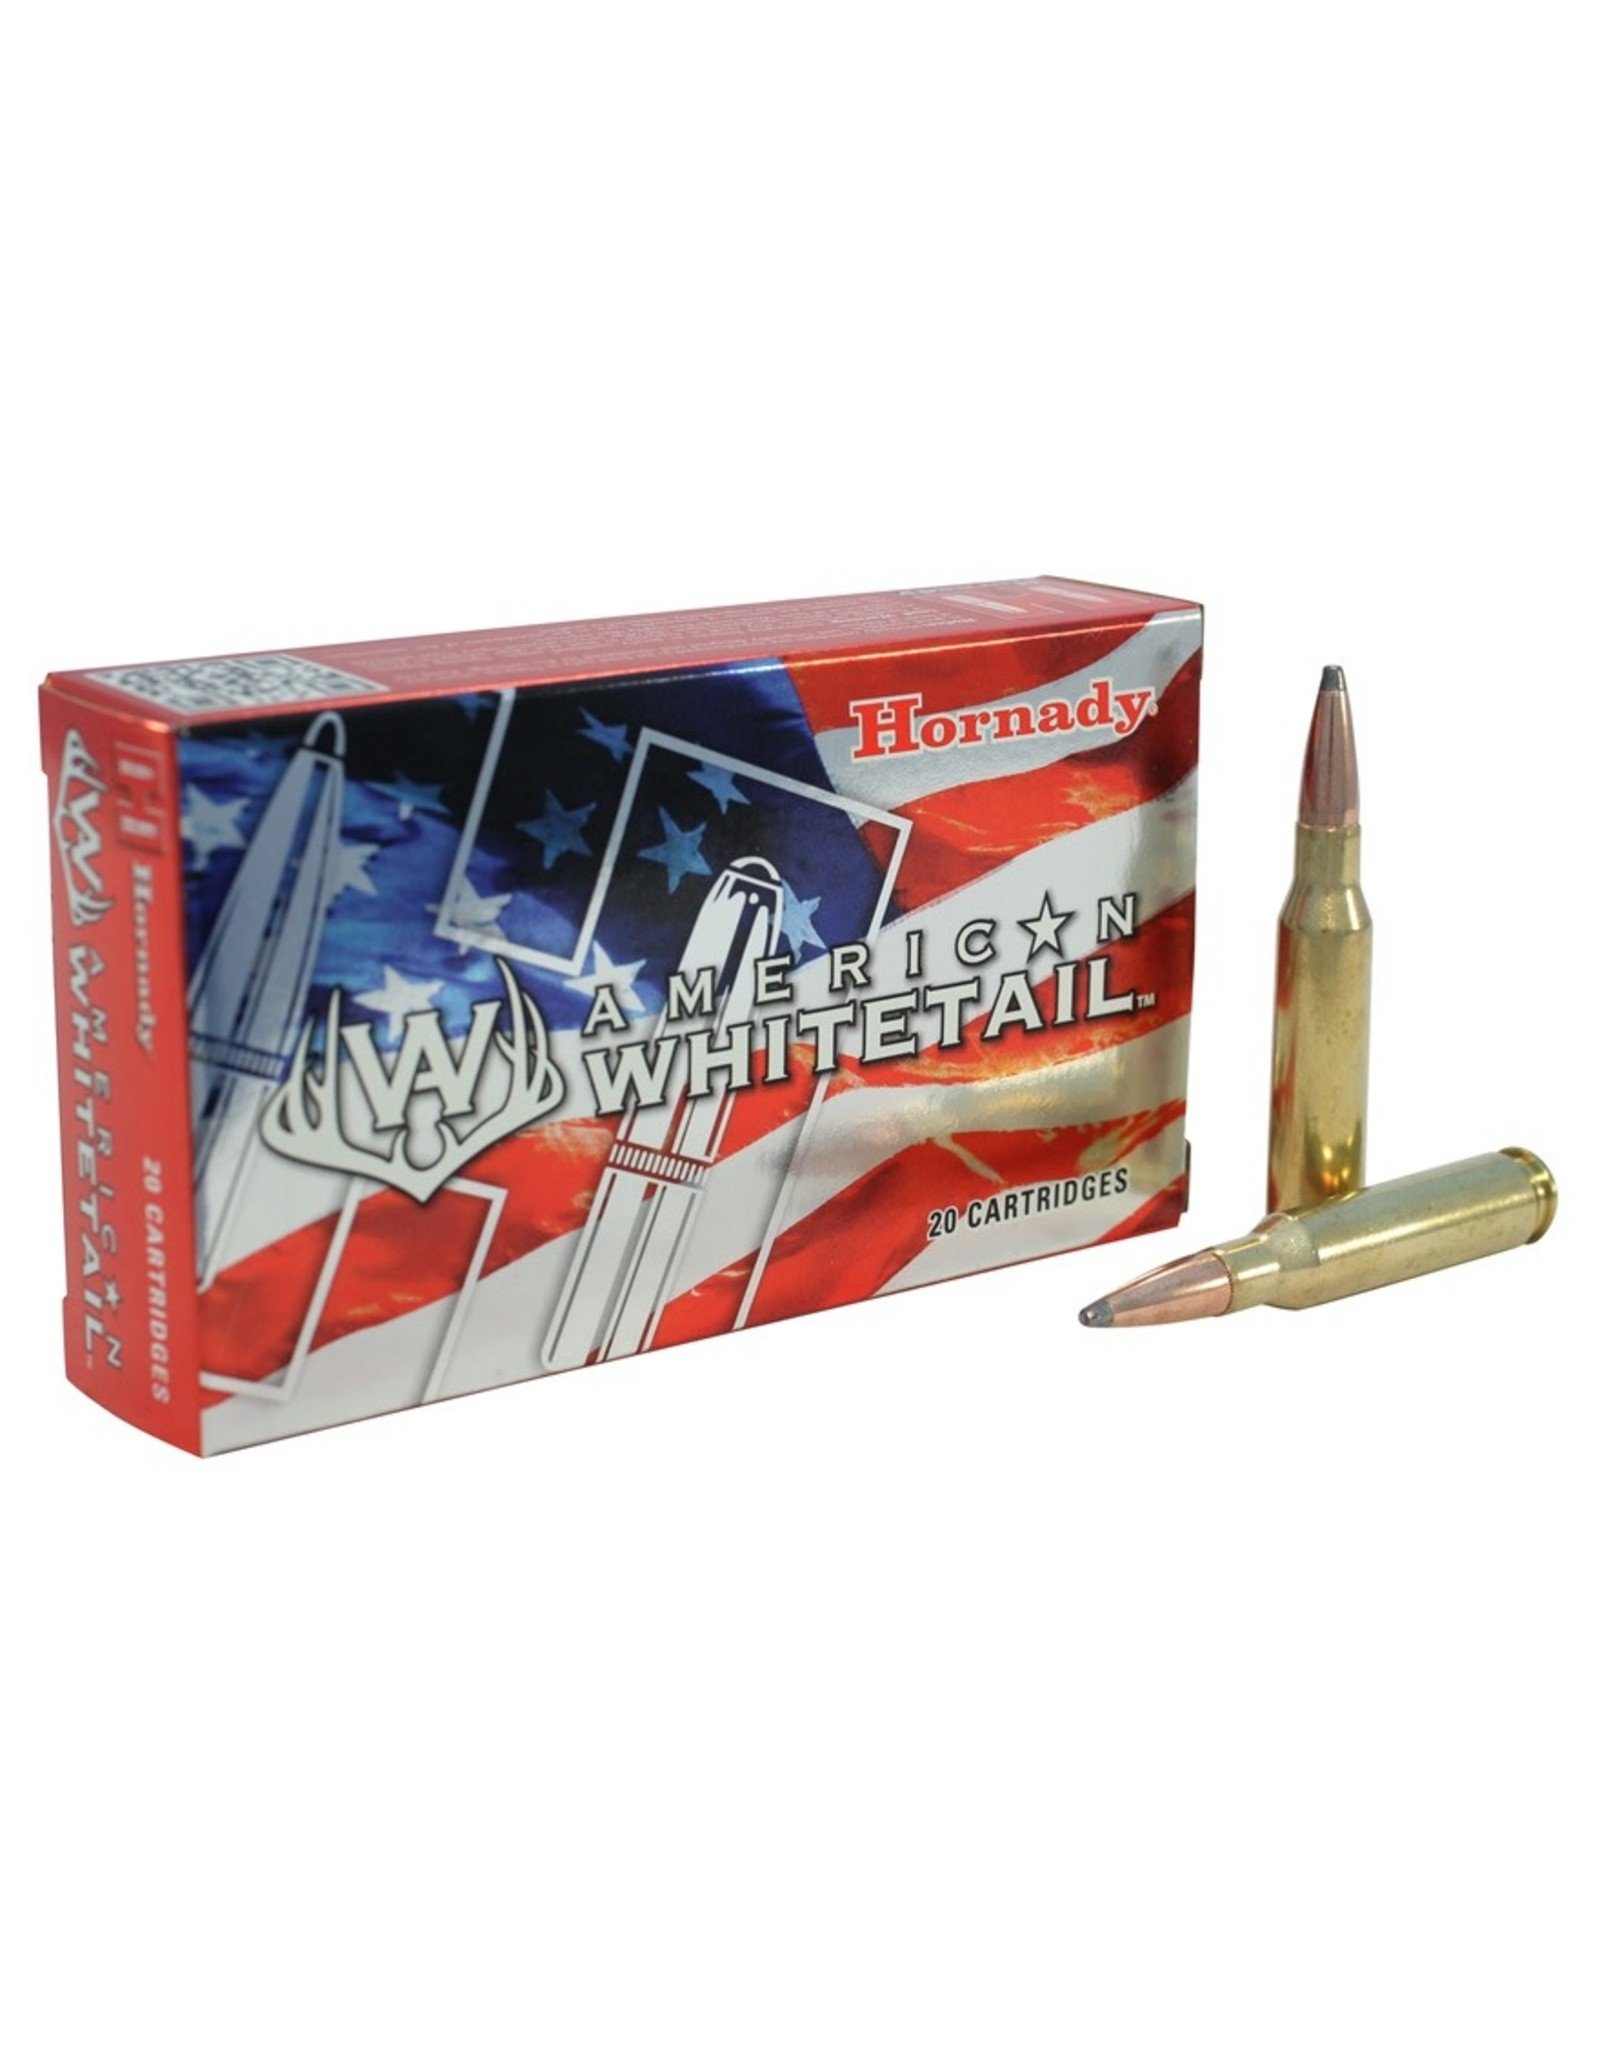 Hornady Hornady 80591 American Whitetail Rifle Ammo 7MM MAG, InterLock SP, 139 Grains, 3150 fps, 20, Boxed